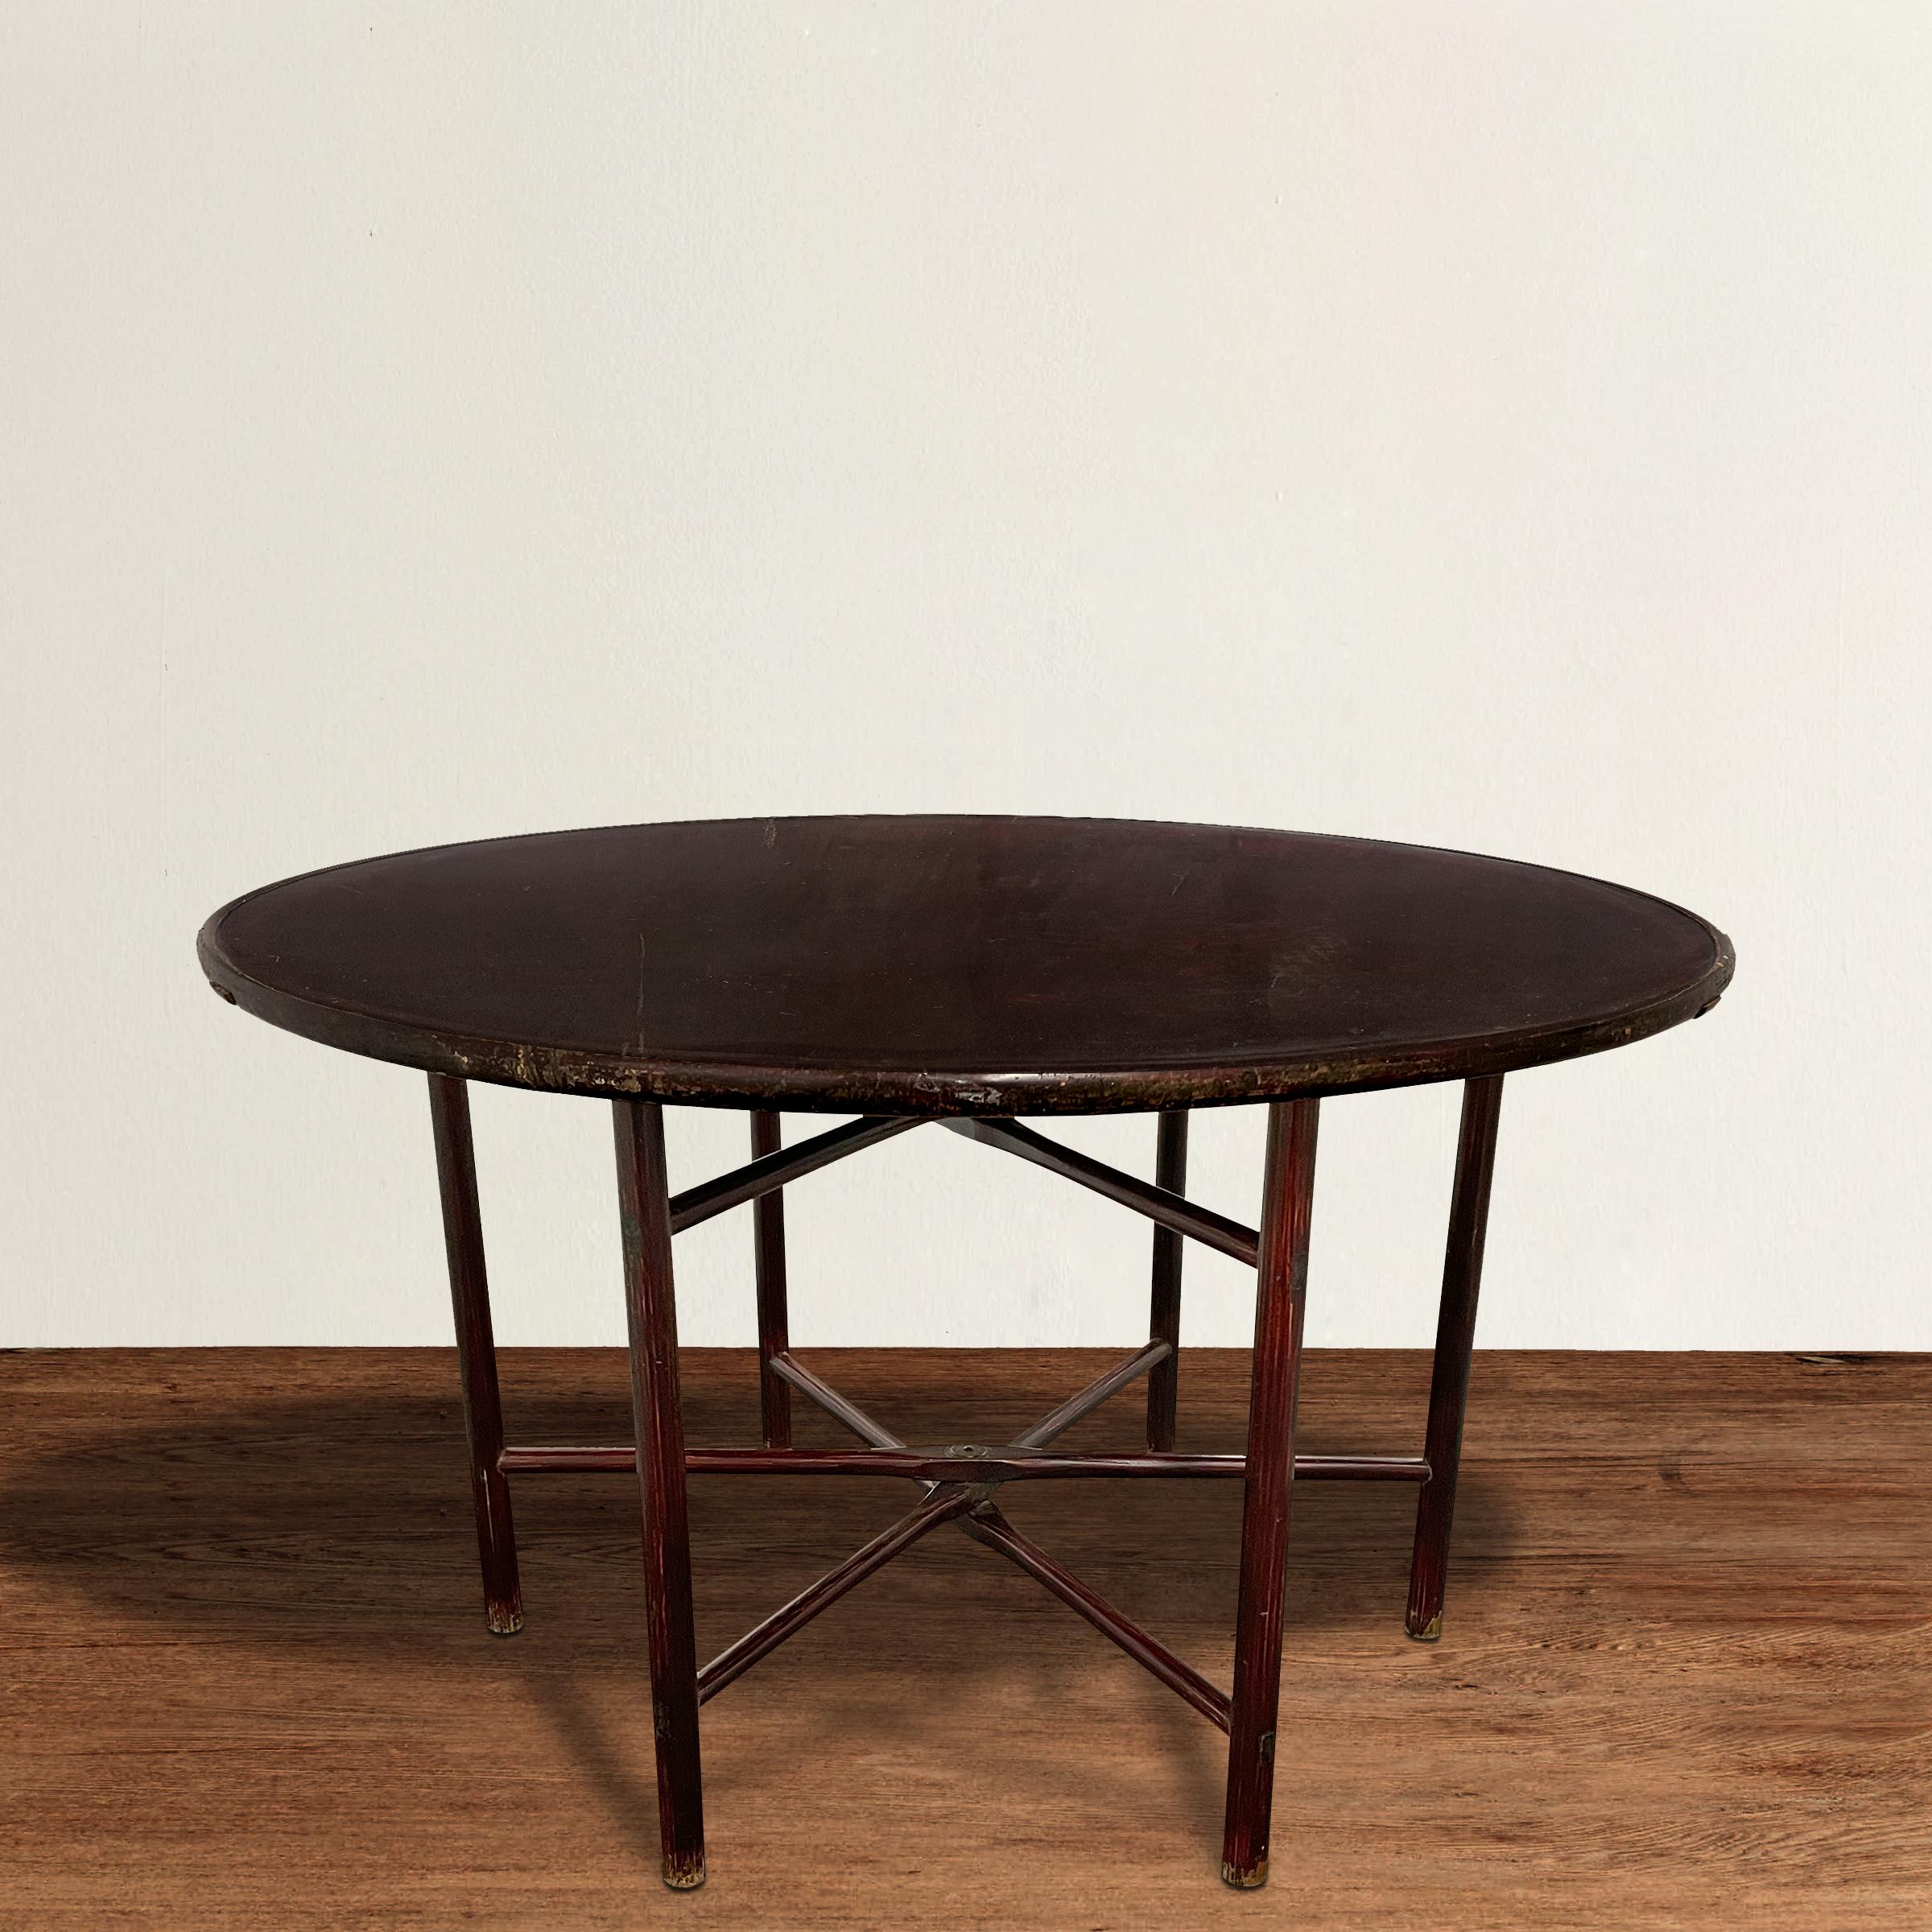 A chic and modern-in-spirit 19th century Chinese elmwood round table with a removable top and collapsible legs, and a fantastic dark sangre-de-boeuf lacquer. Legs can be an easily cut down to make the table standard dining height, or coffee table